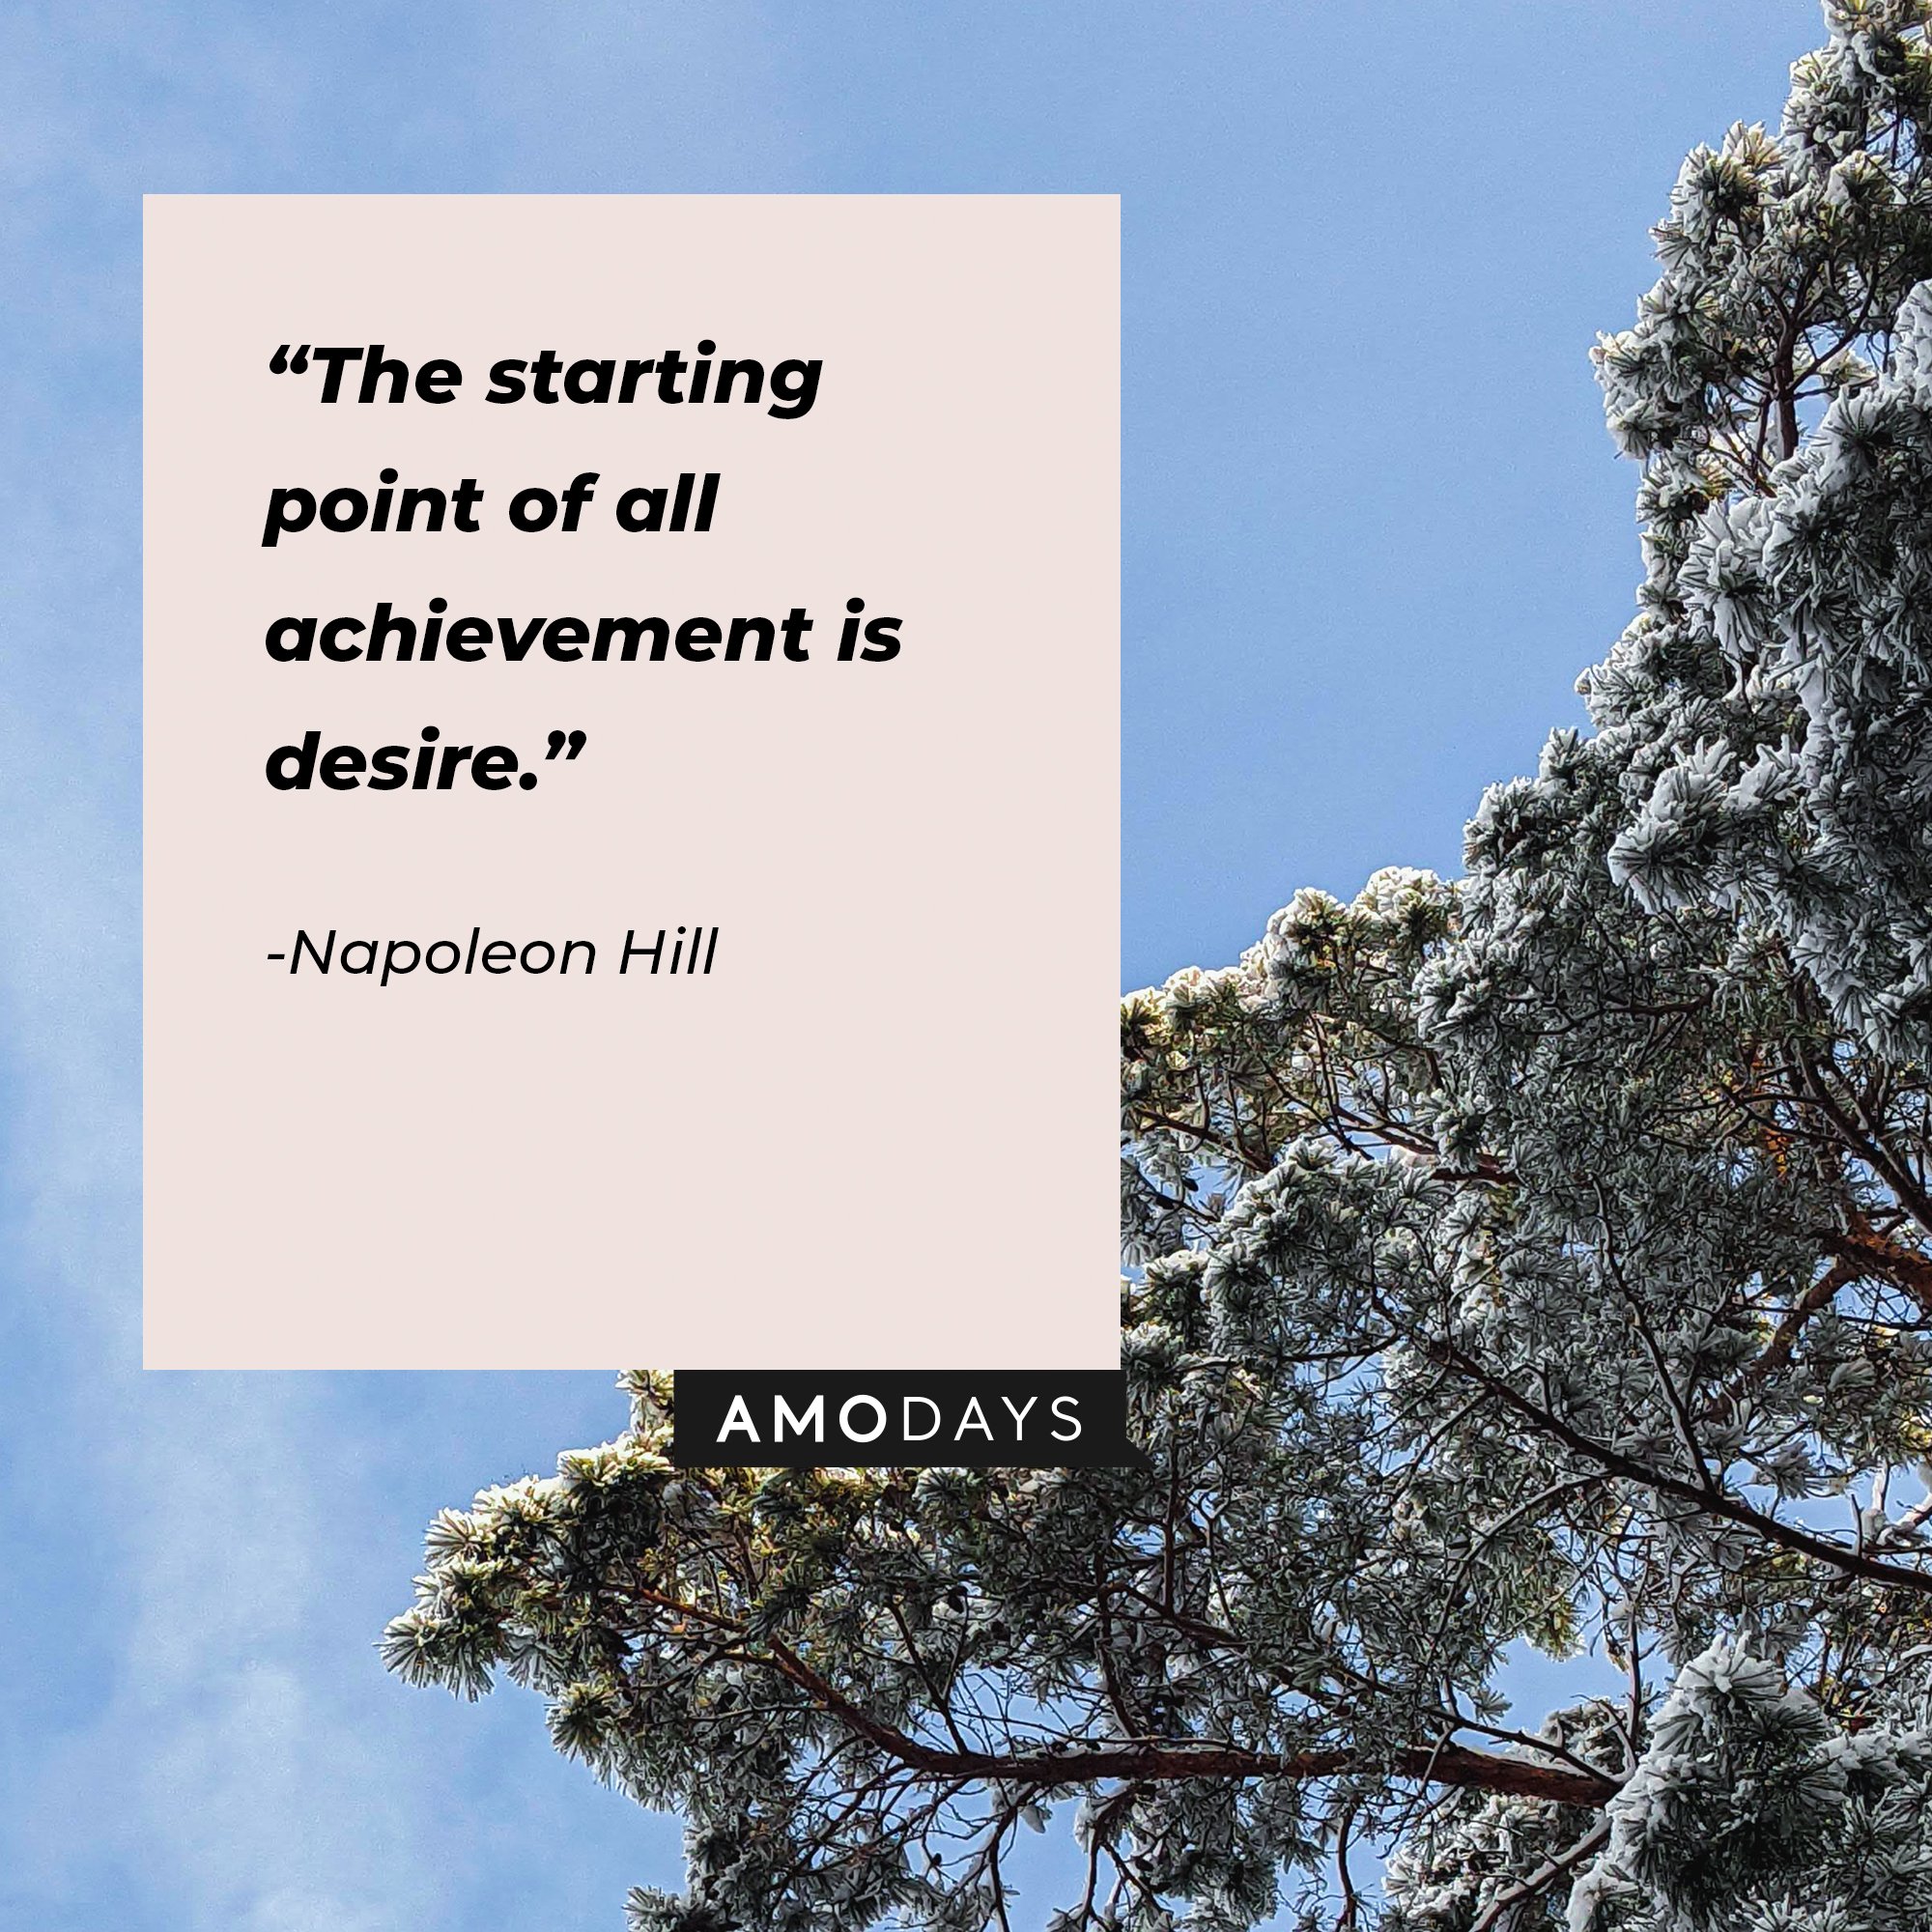 Napoleon Hill's quote: “The starting point of all achievement is desire.”  | Image: AmoDays